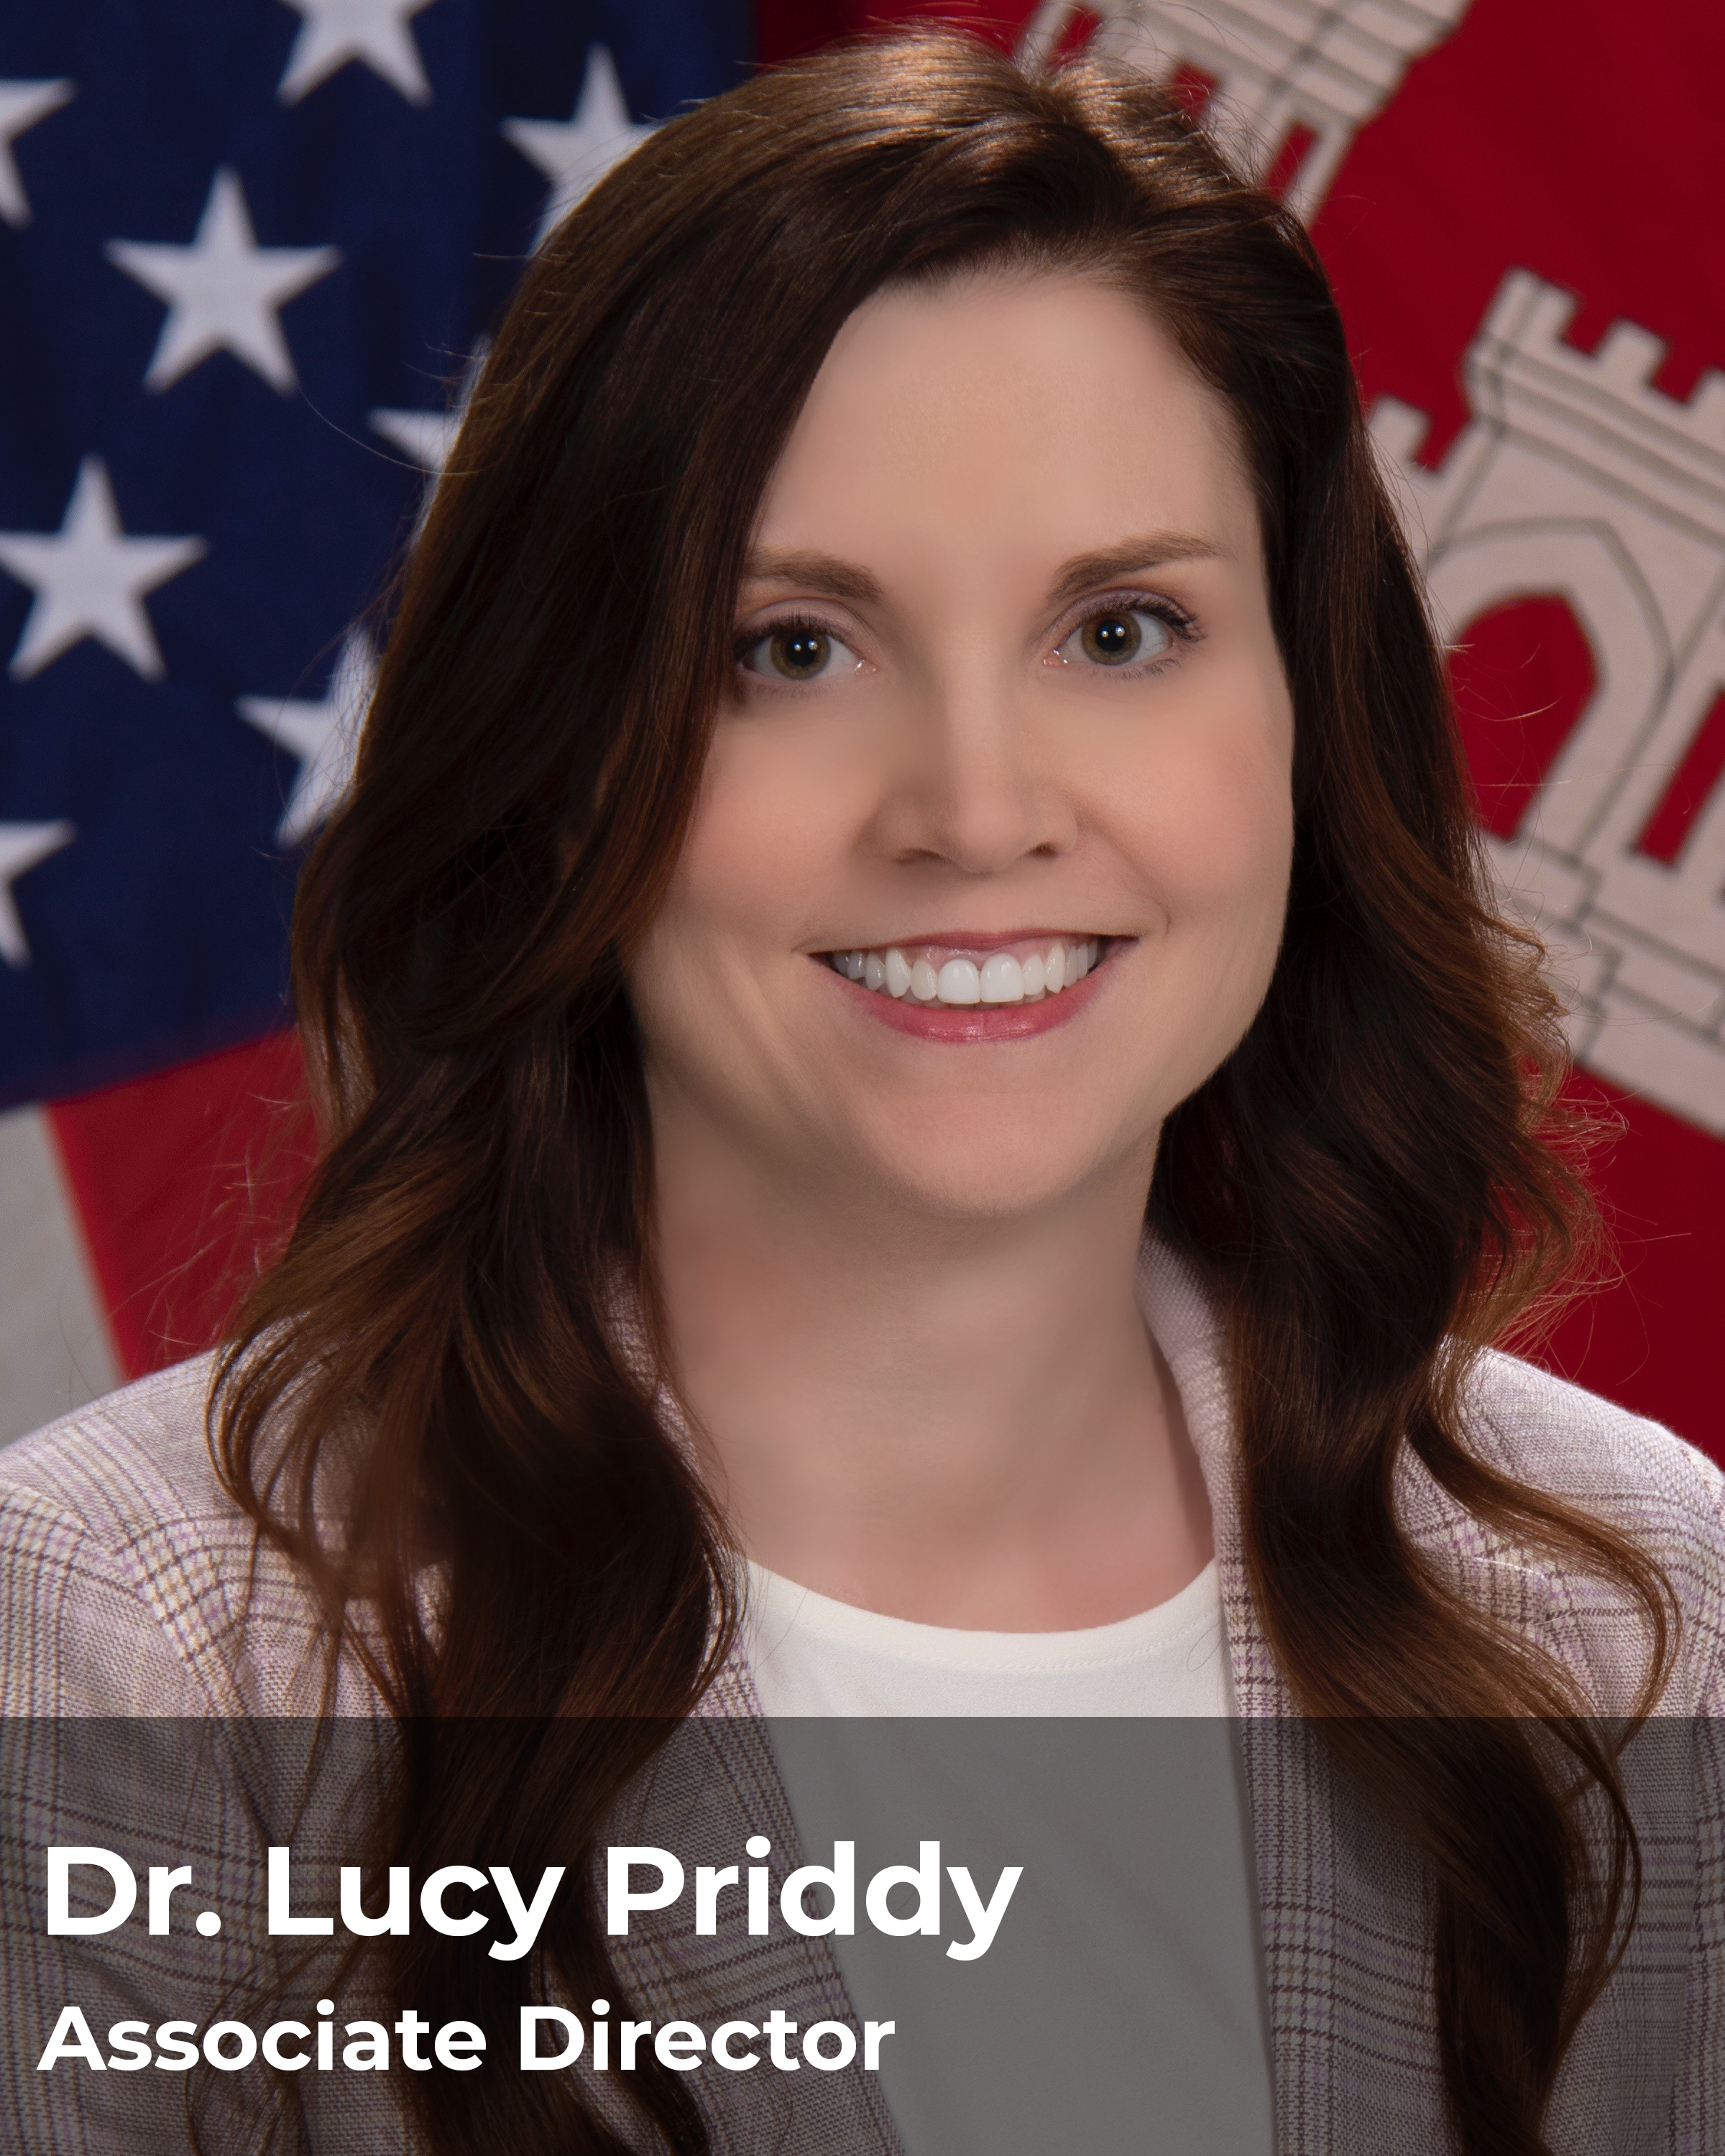 Dr. Lucy Priddy, Associate Director